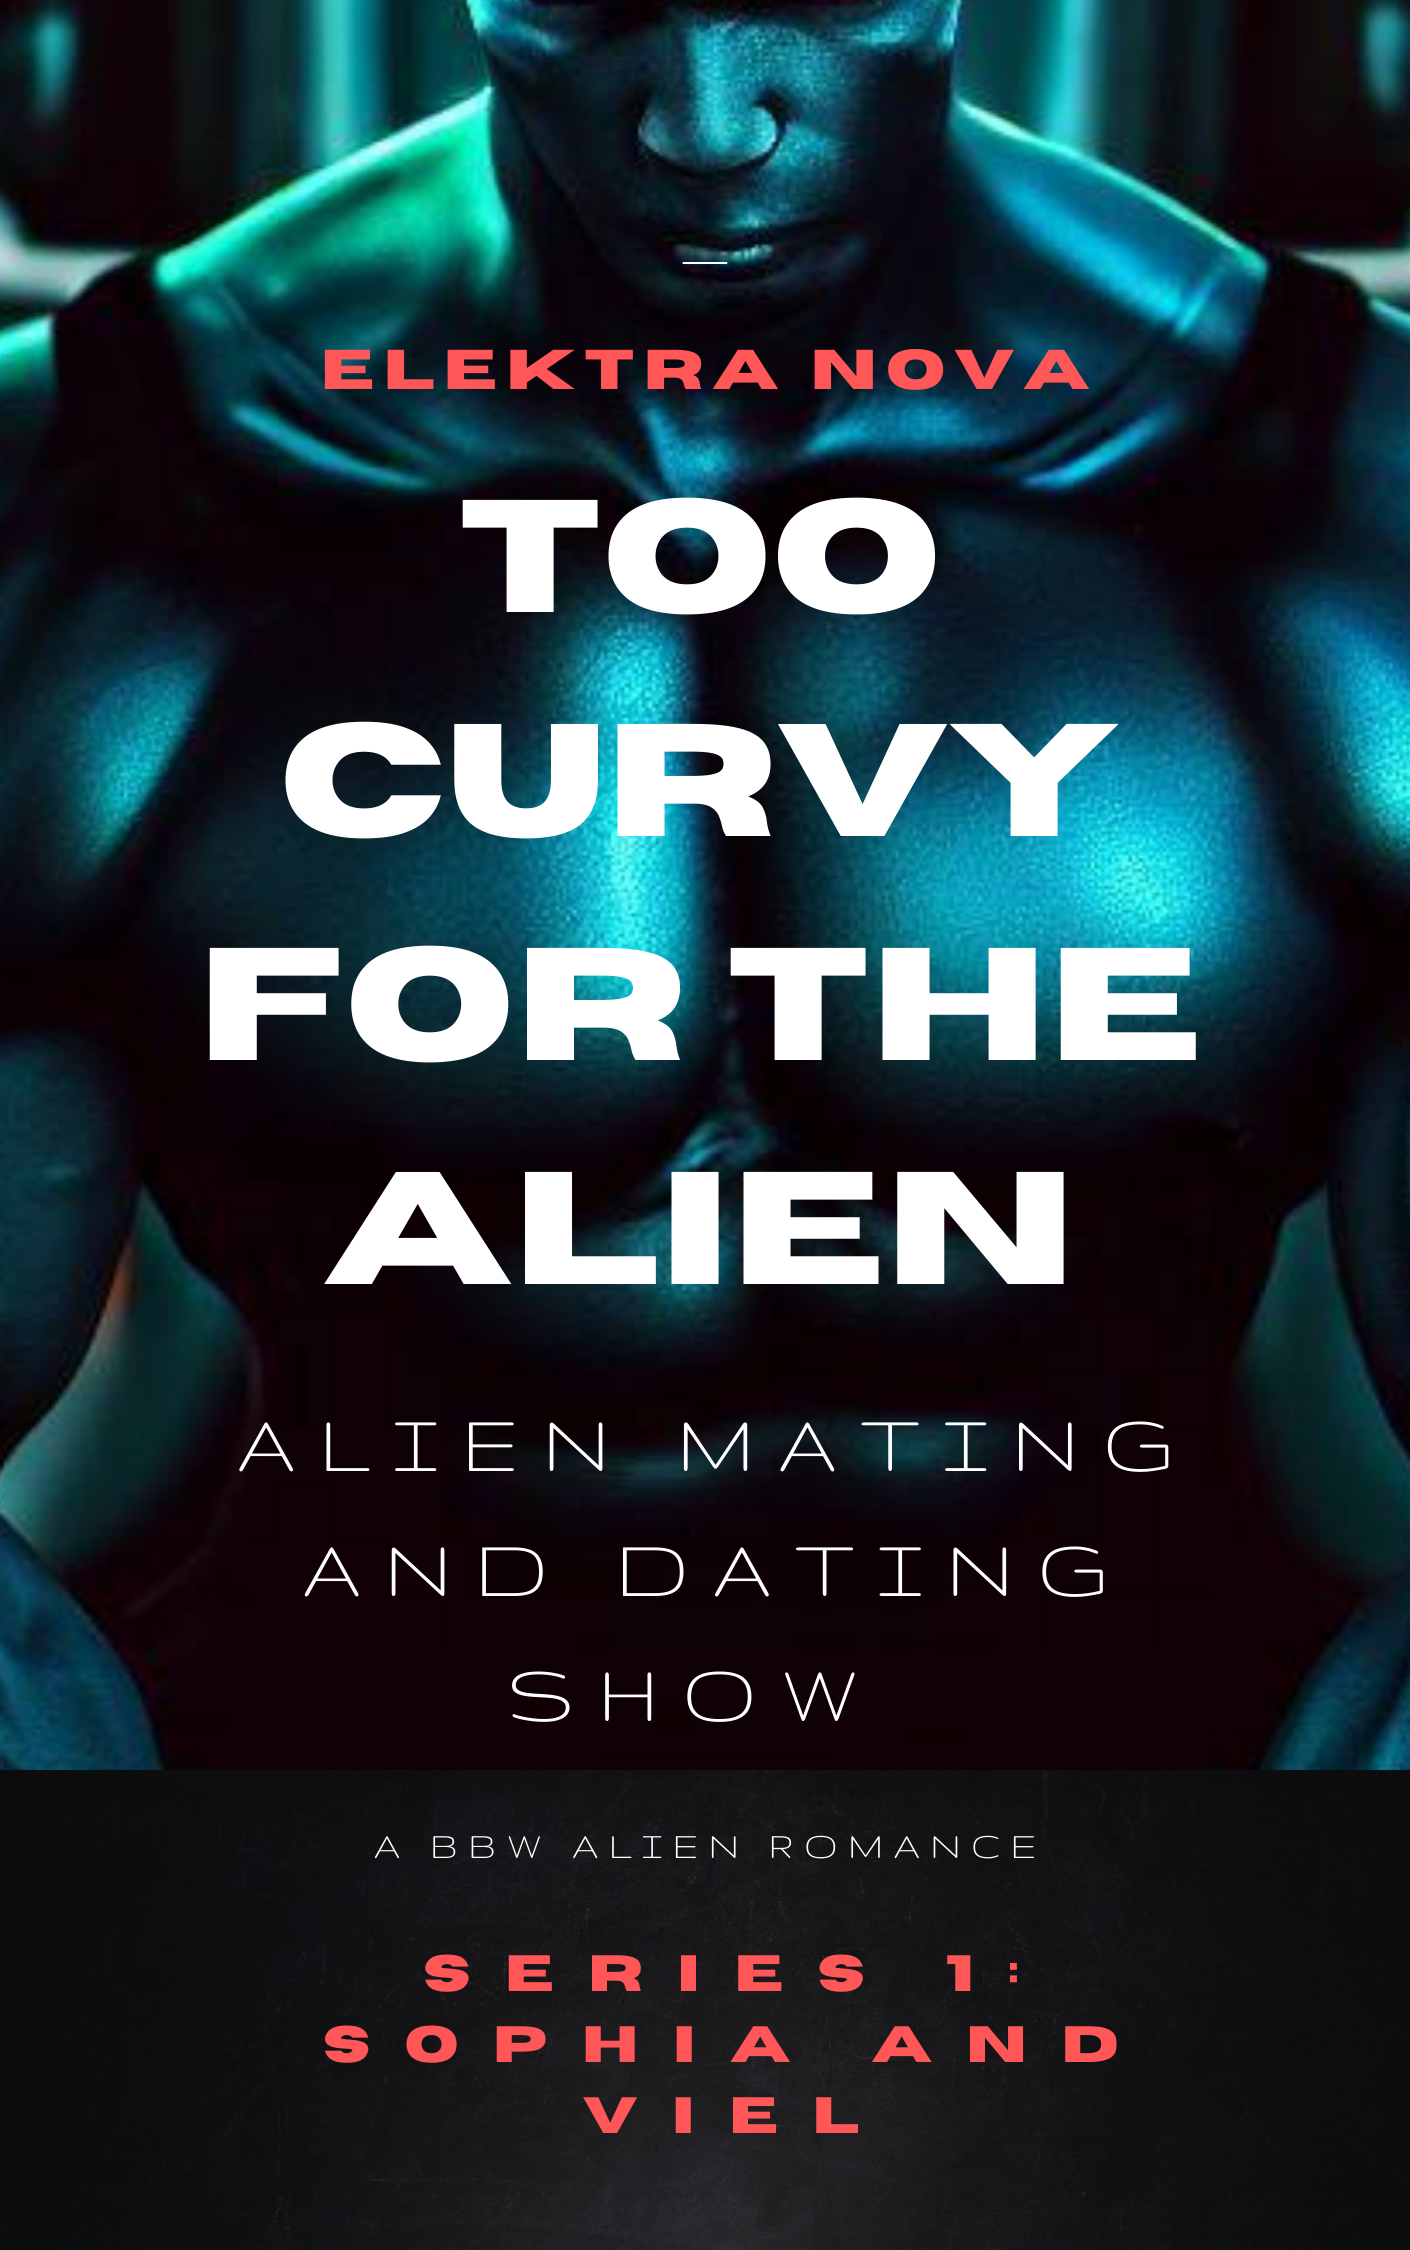 Too Curvy for the Alien Book Cover showing a sexy blue naked male alien torso